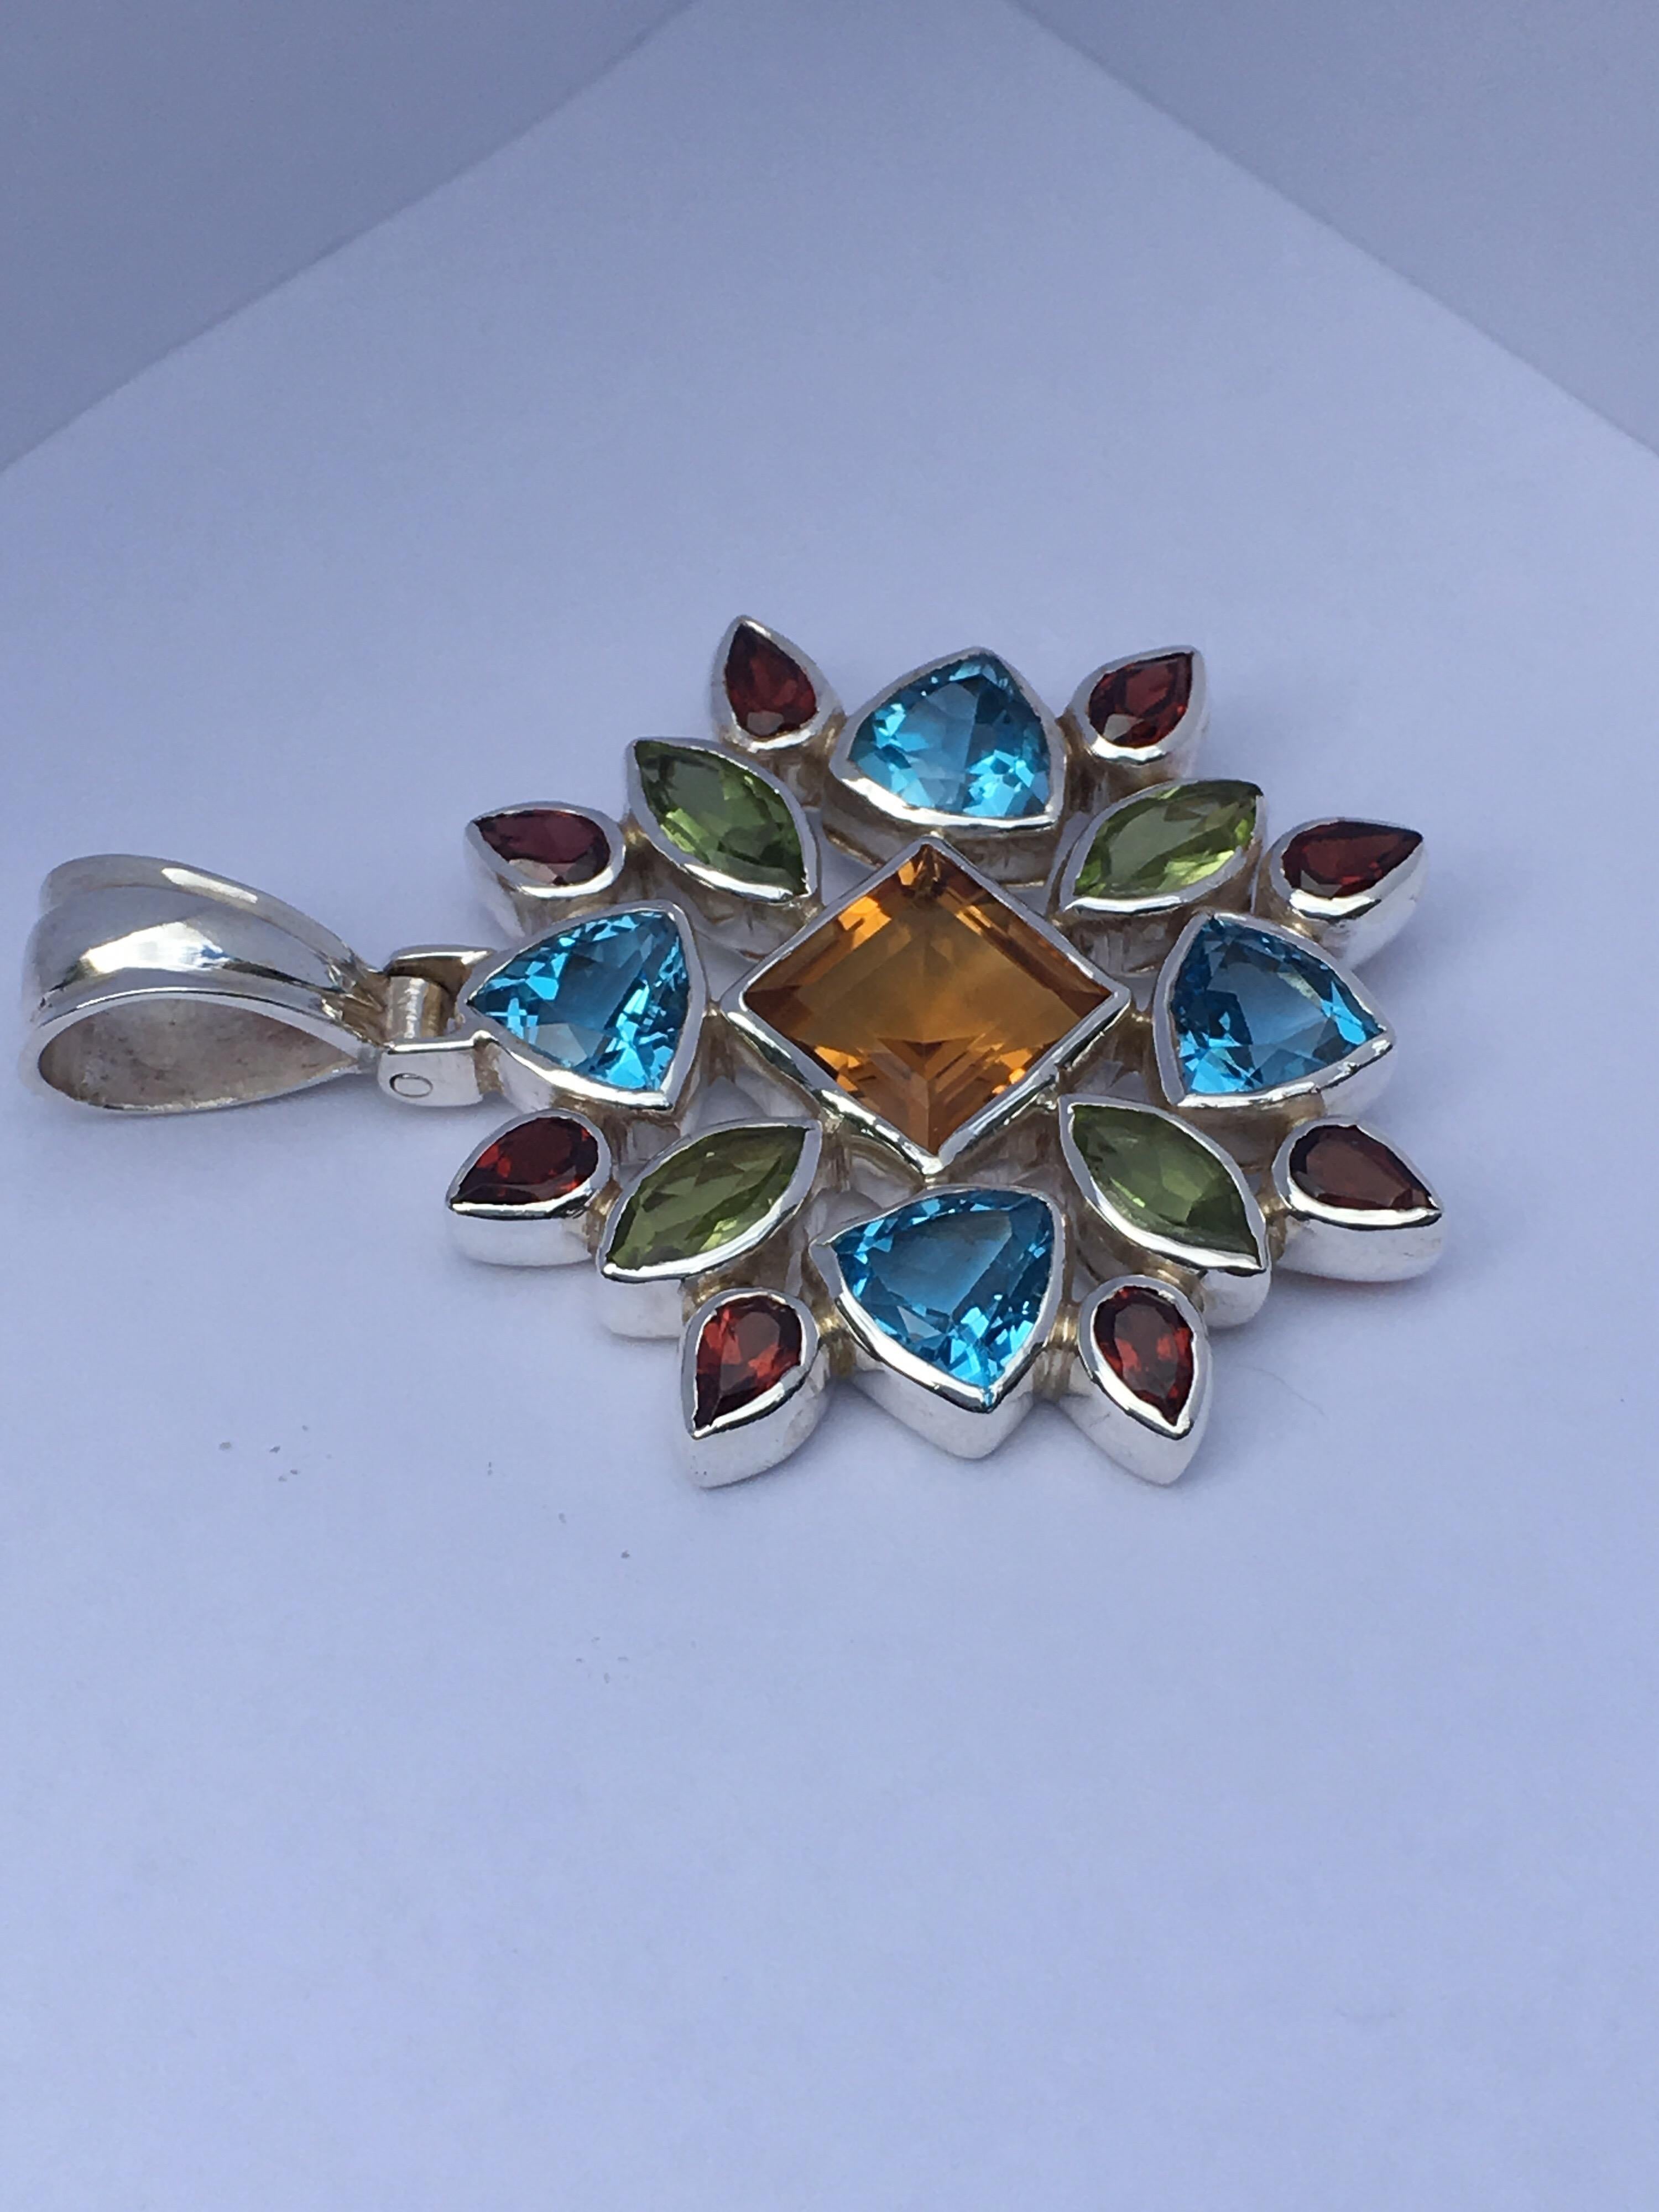 Square Citrine 9 MM, Trillion Blue Topaz 7 MM, Marquise Garnet 4 MM X 8 MM Pendant is 35 MM .
All the stones are natural and hand cut and polished.
Total weight of the Pendant is 12.84 Gram.
You can wear this Pendant with silver chain or leather